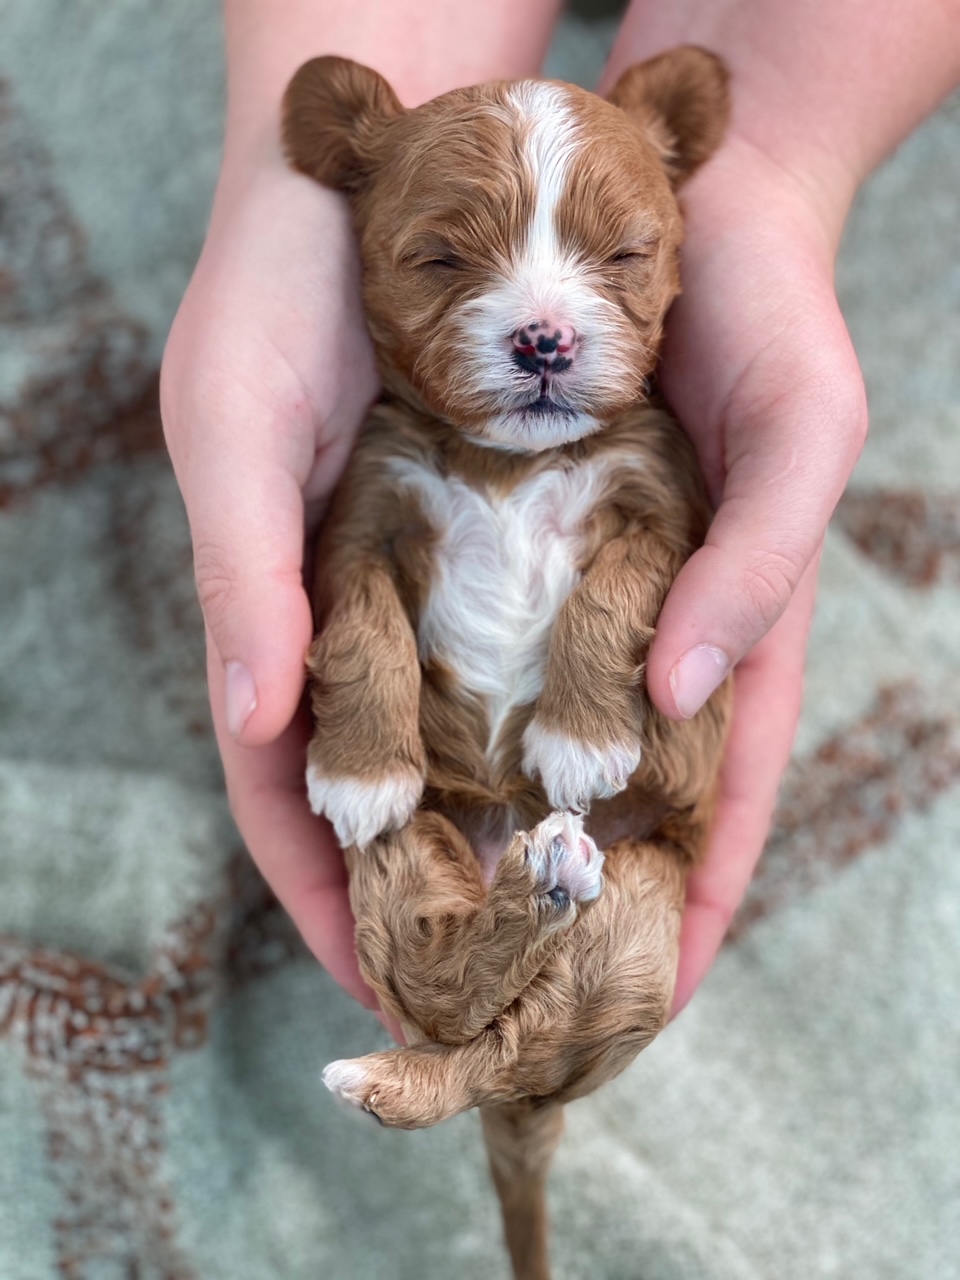 A person gently cradles a tiny brown and white Female Cavapoo in their hands.